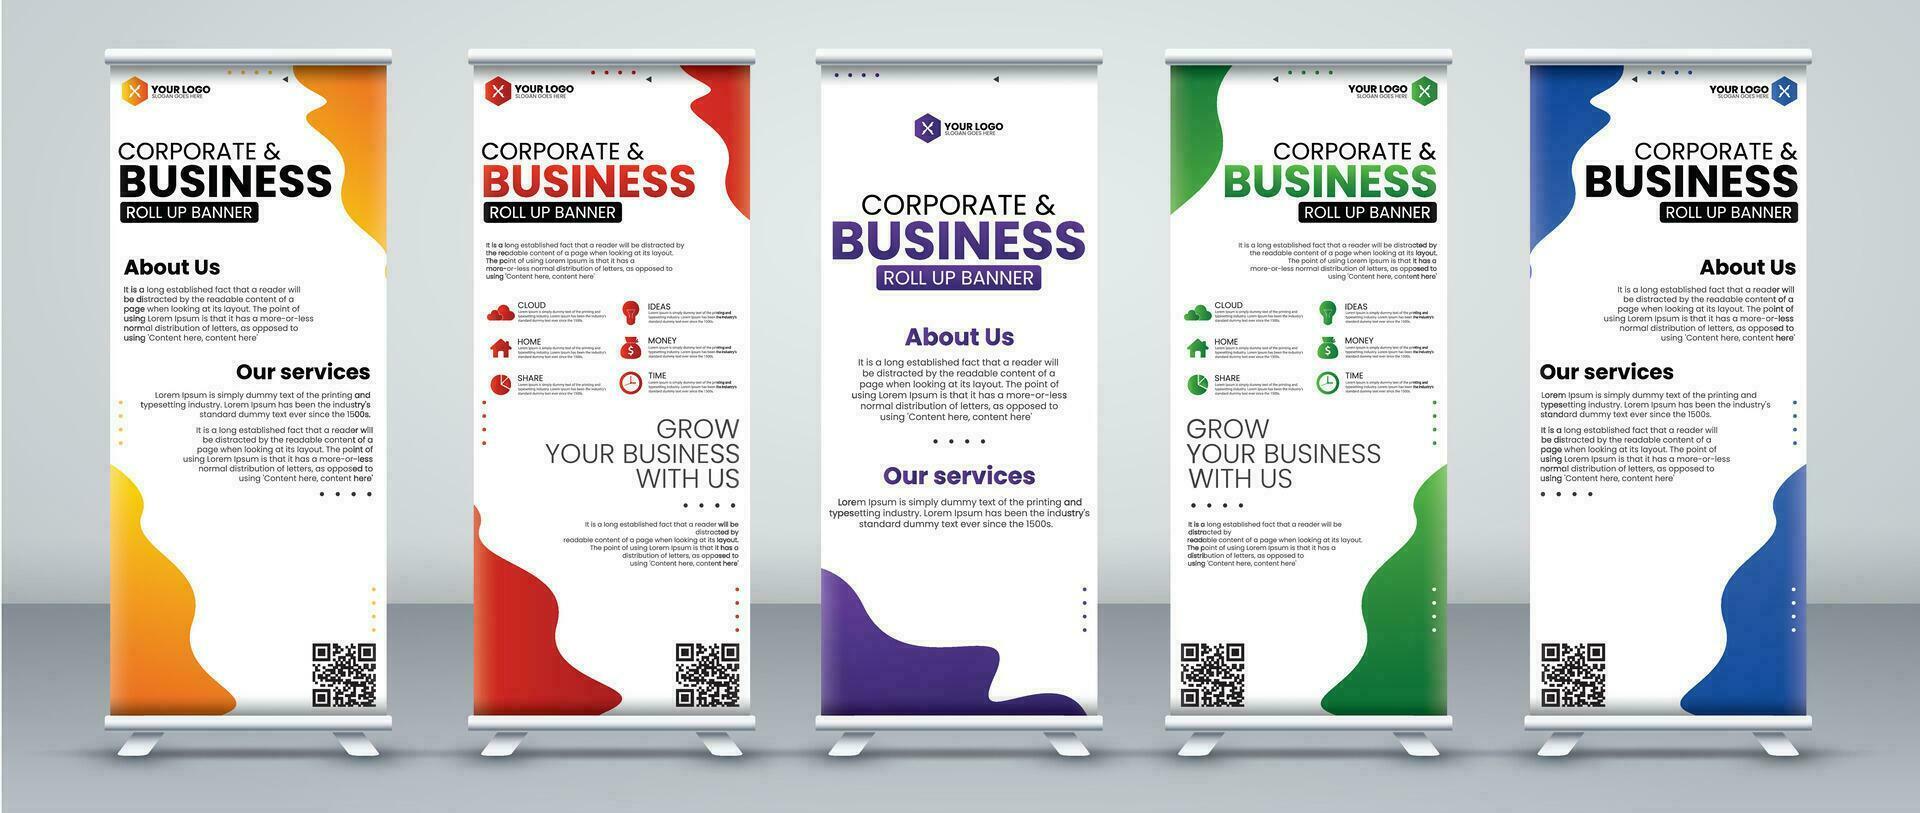 print ready roll up banner design in orange, red, purple, green and blue colors vector